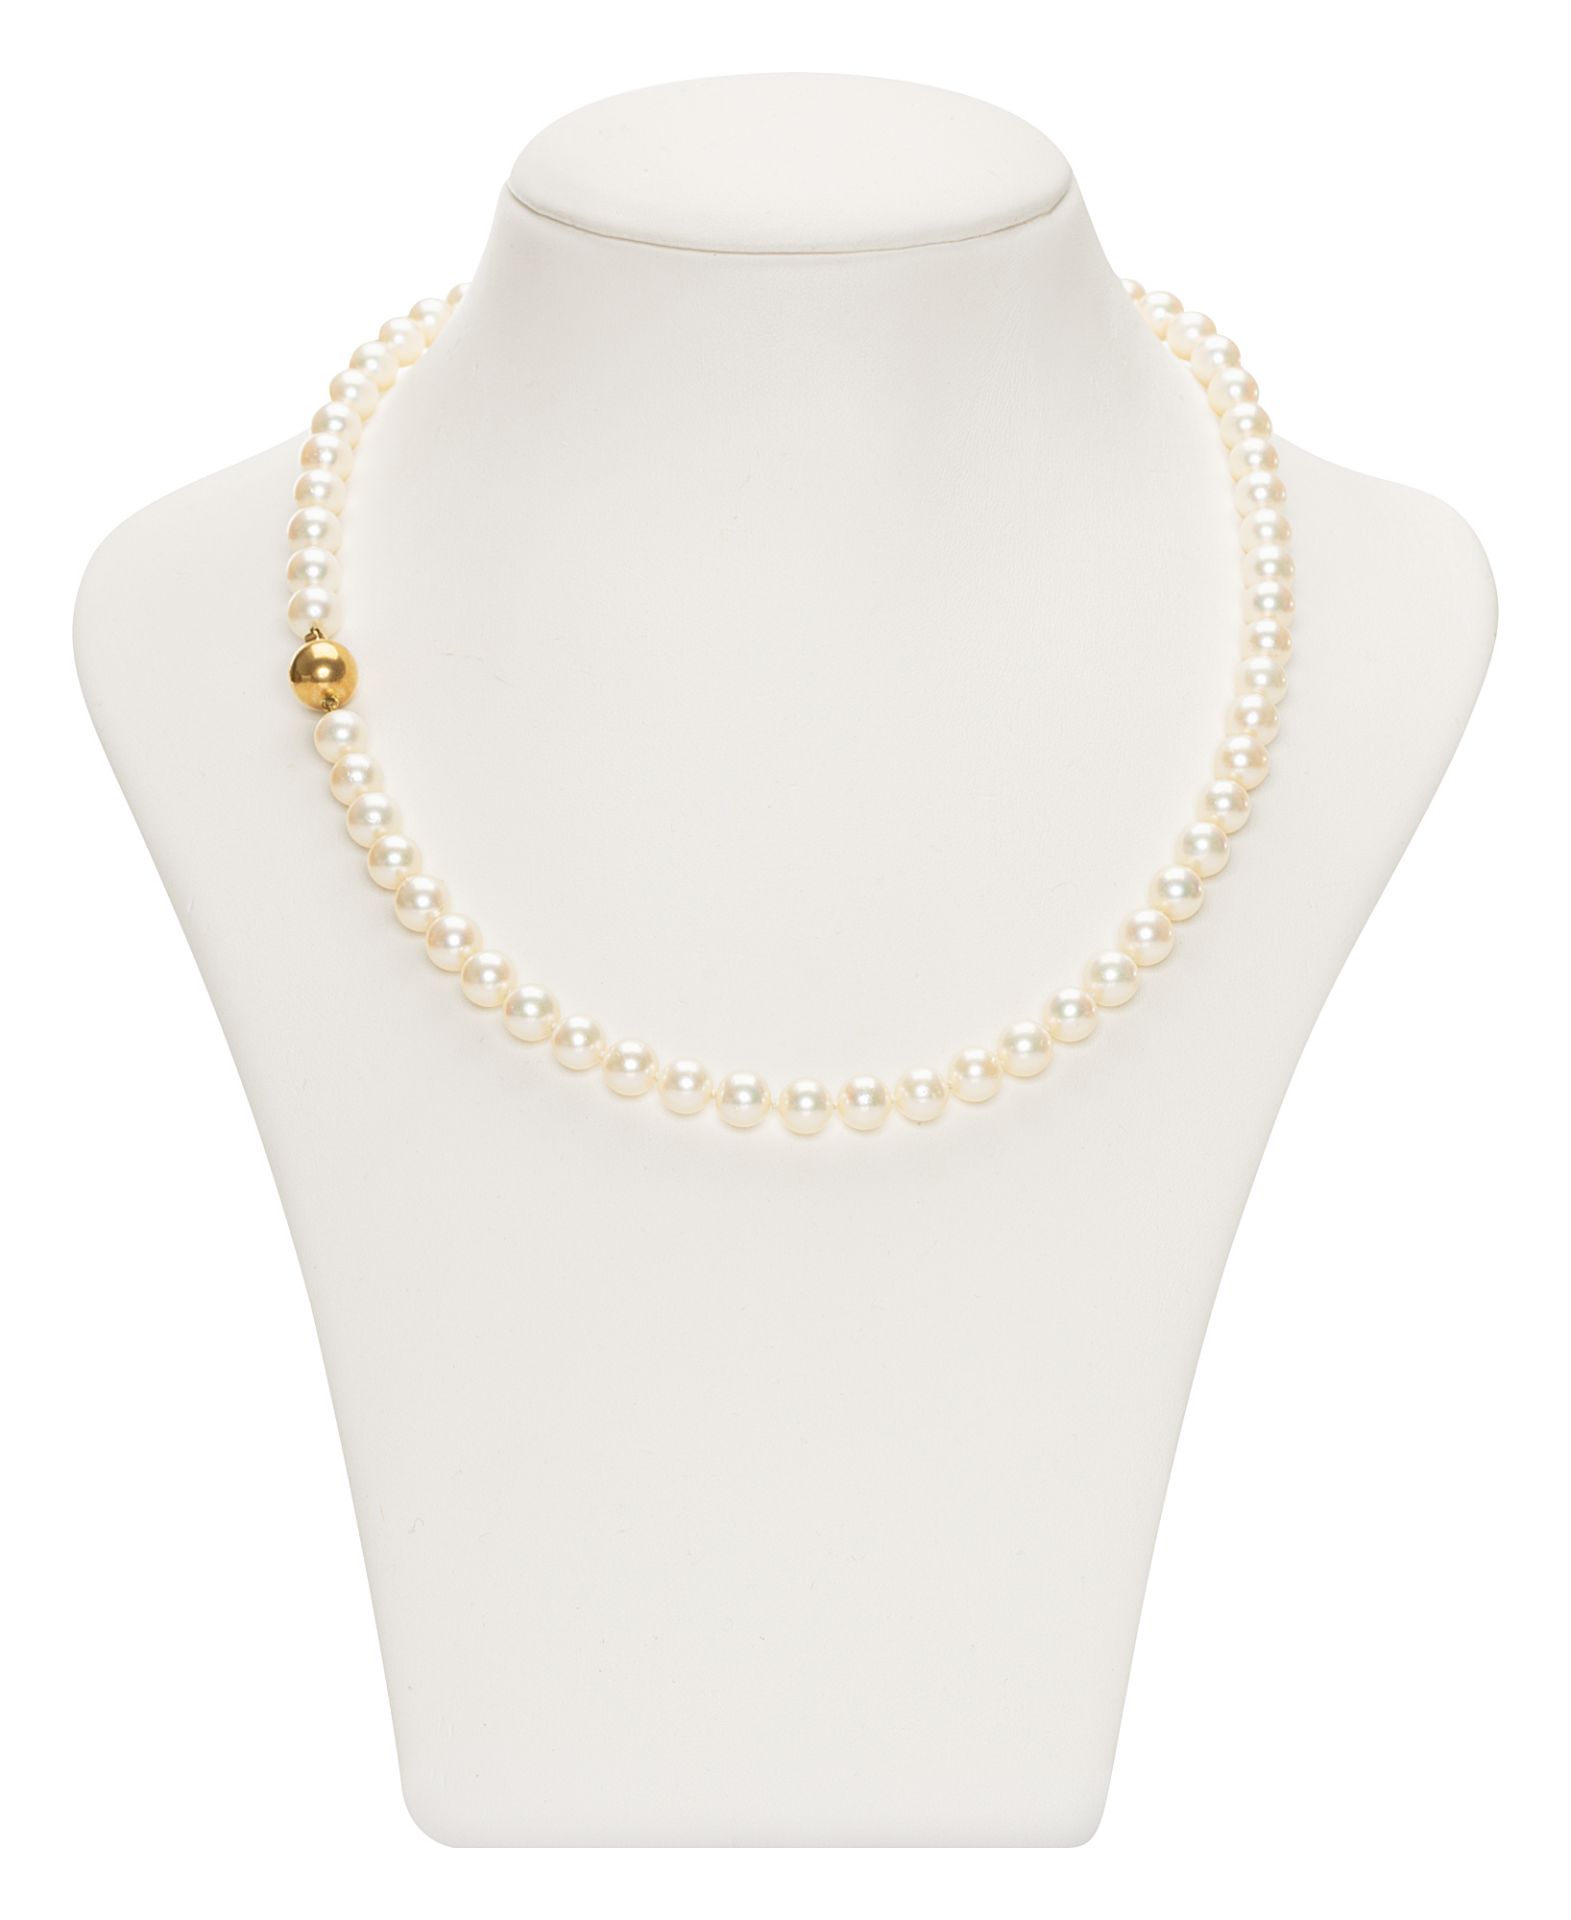 Matinee pearl necklace with polished ball closure